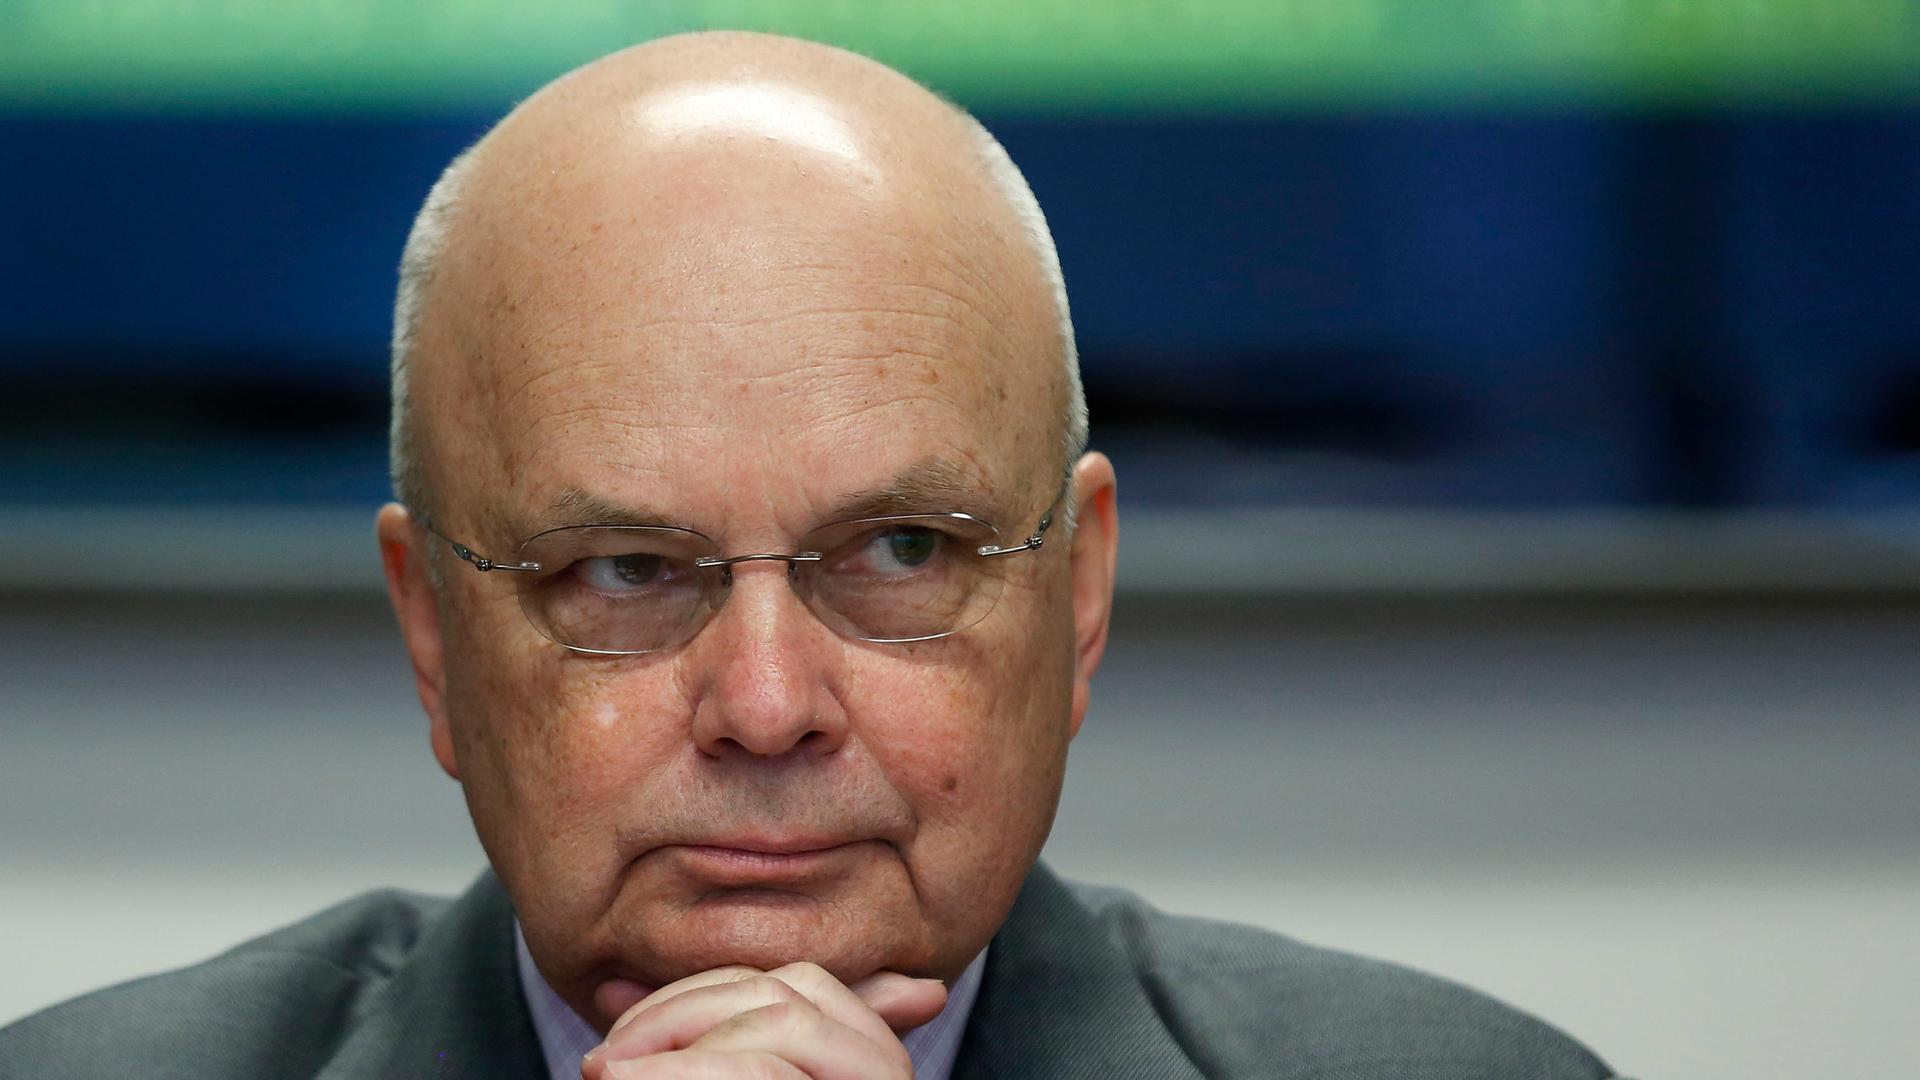 Former director of the NSA and CIA, Michael Hayden, at a cyber security conference in 2014